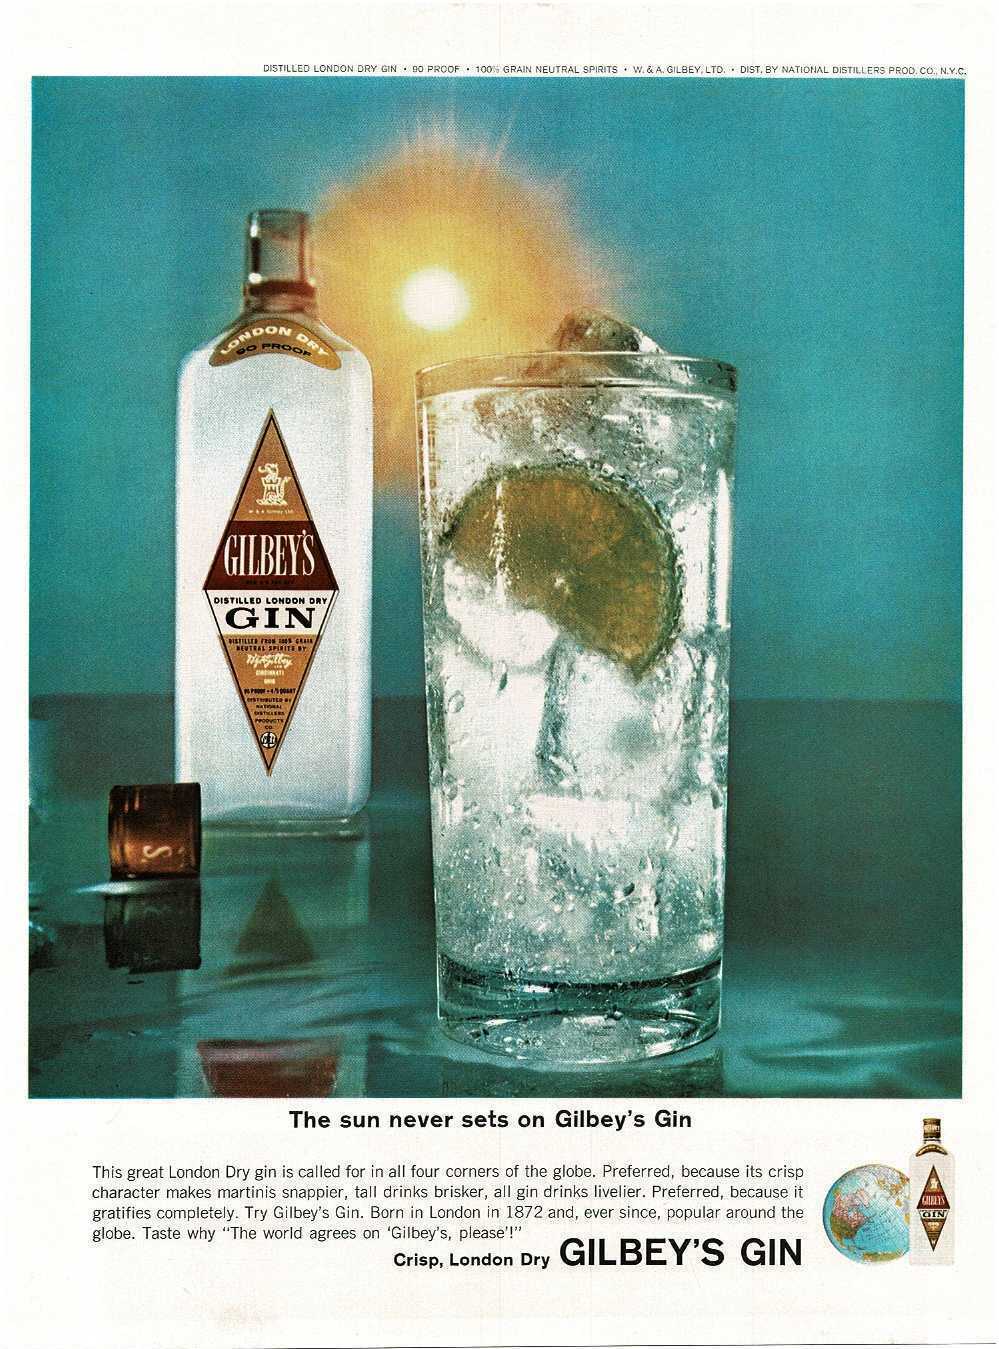 1964 Gilbey's Gin Tall Glass On Water In Sunlight Vintage Print Ad